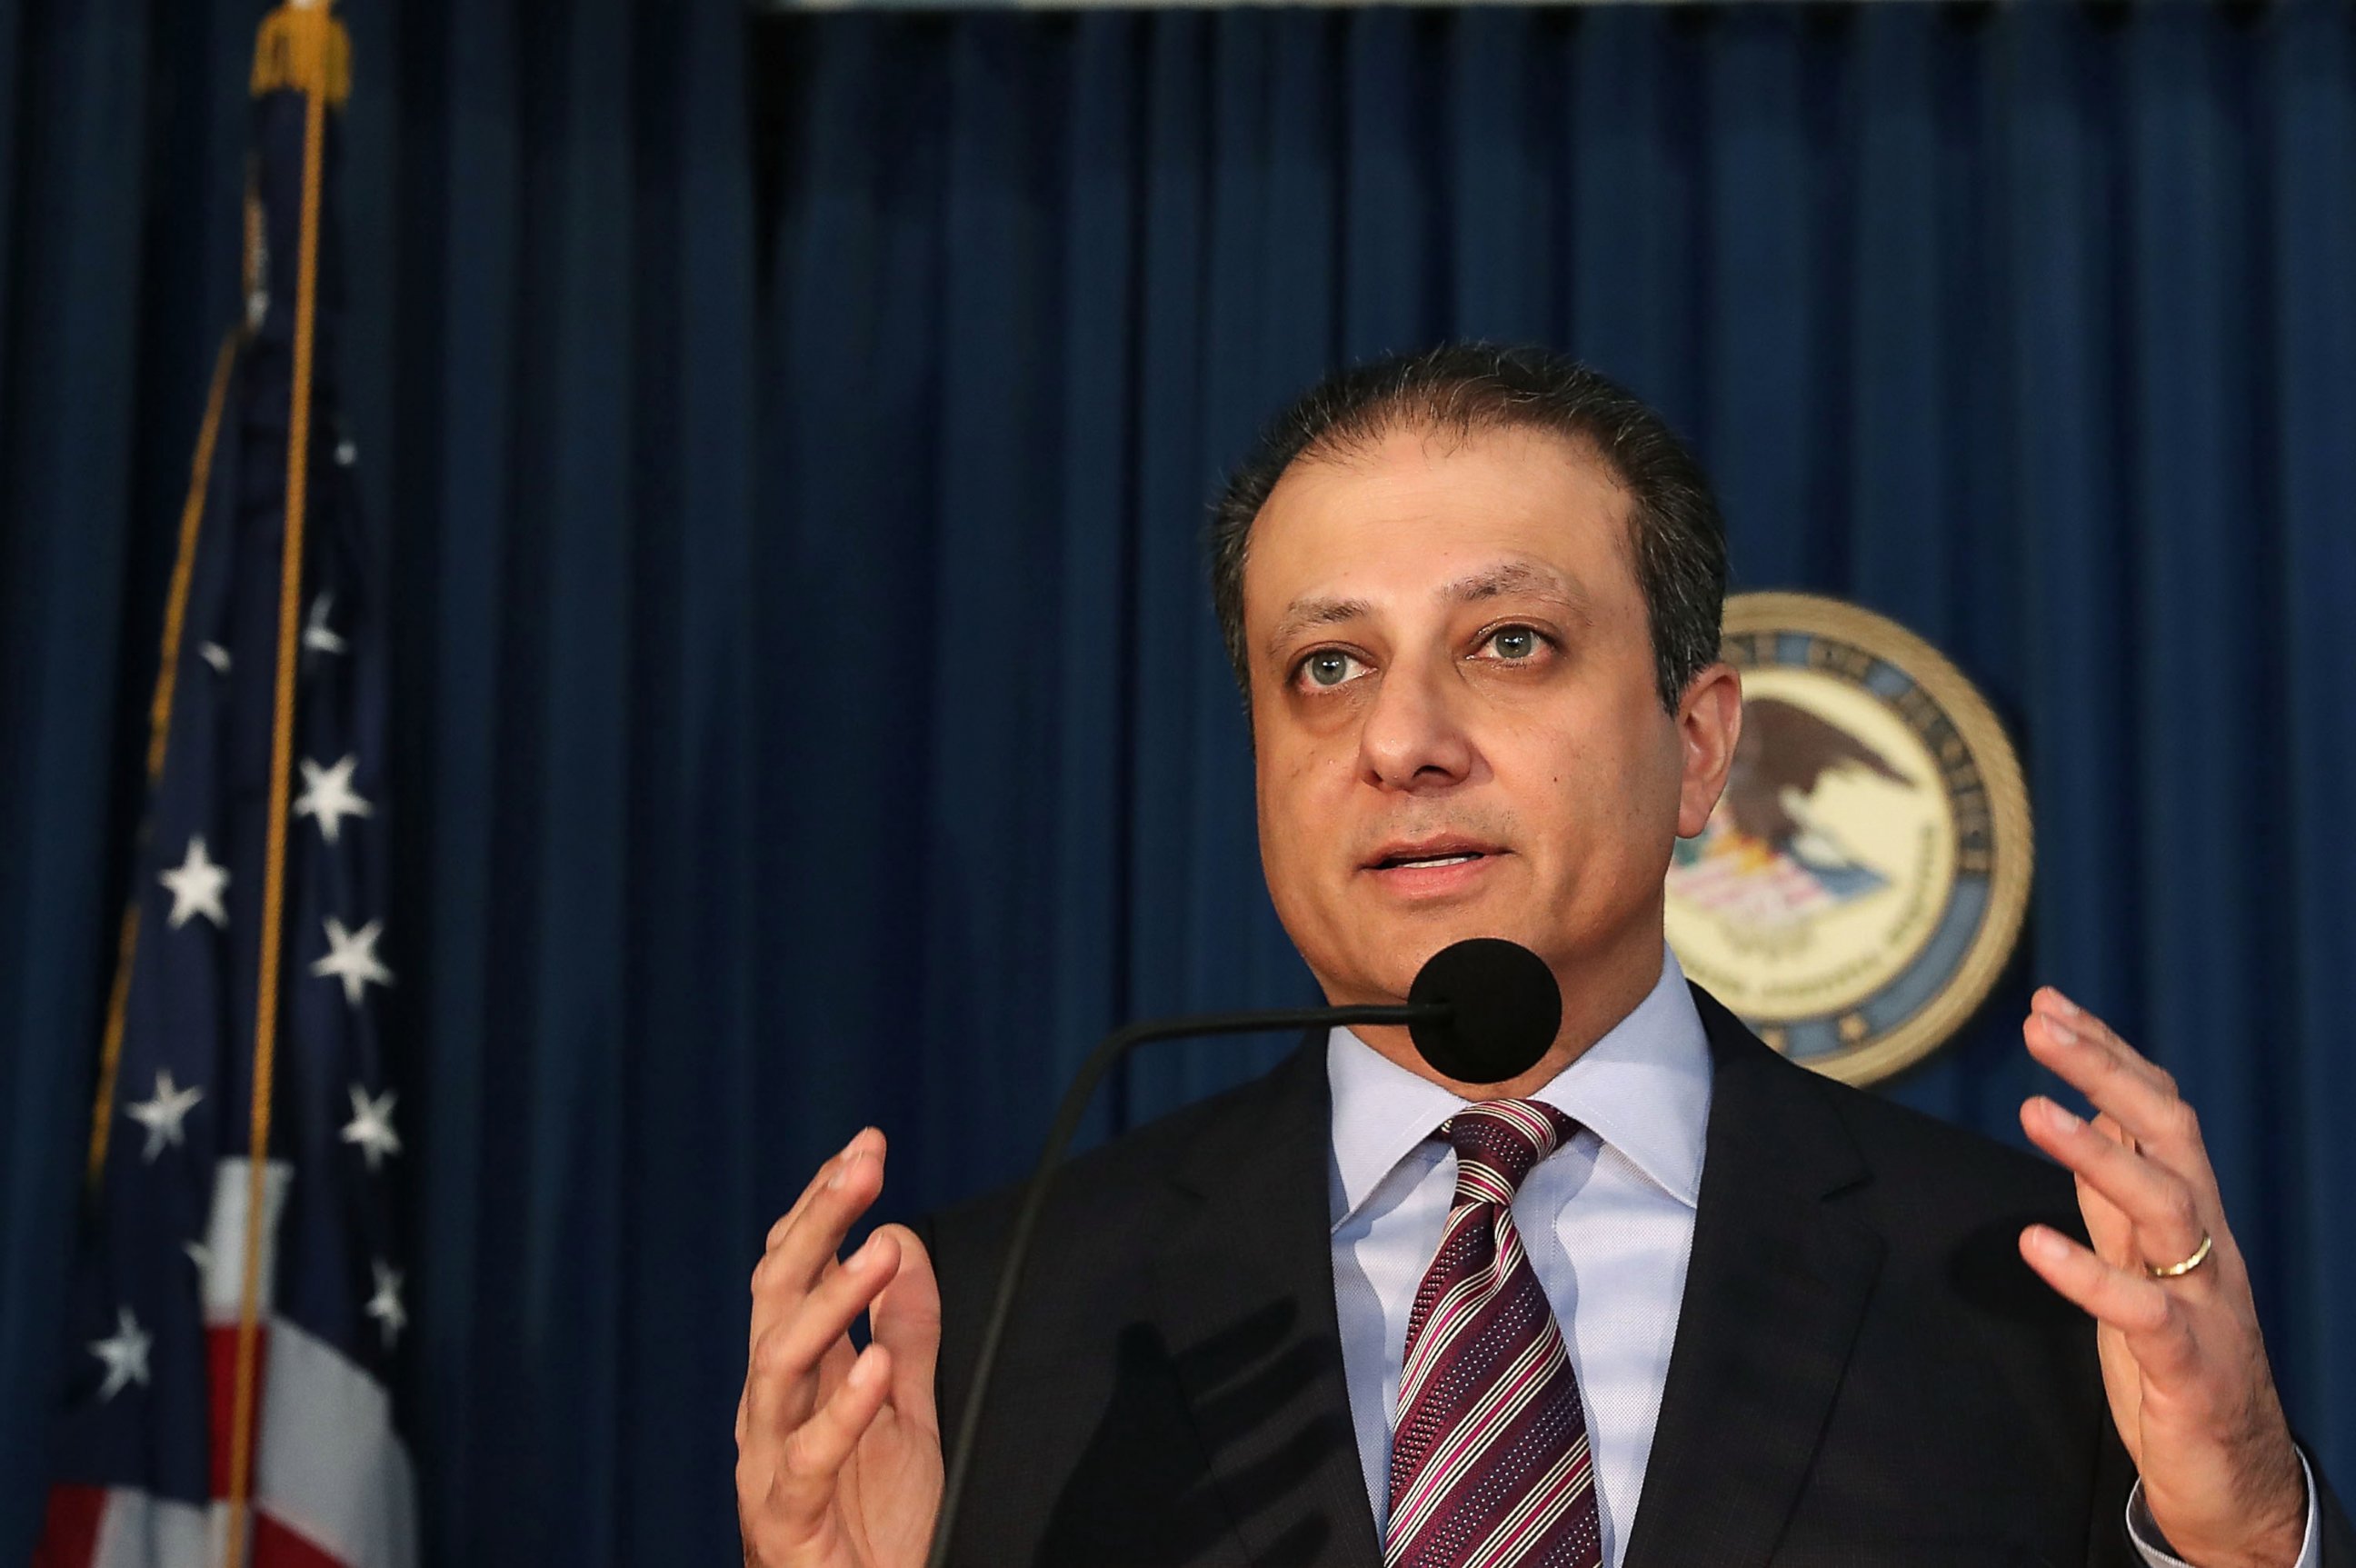 PHOTO: Preet Bharara, U.S. attorney for the Southern District of New York, speaks at a news conference, Nov. 17, 2016 in New York City.  